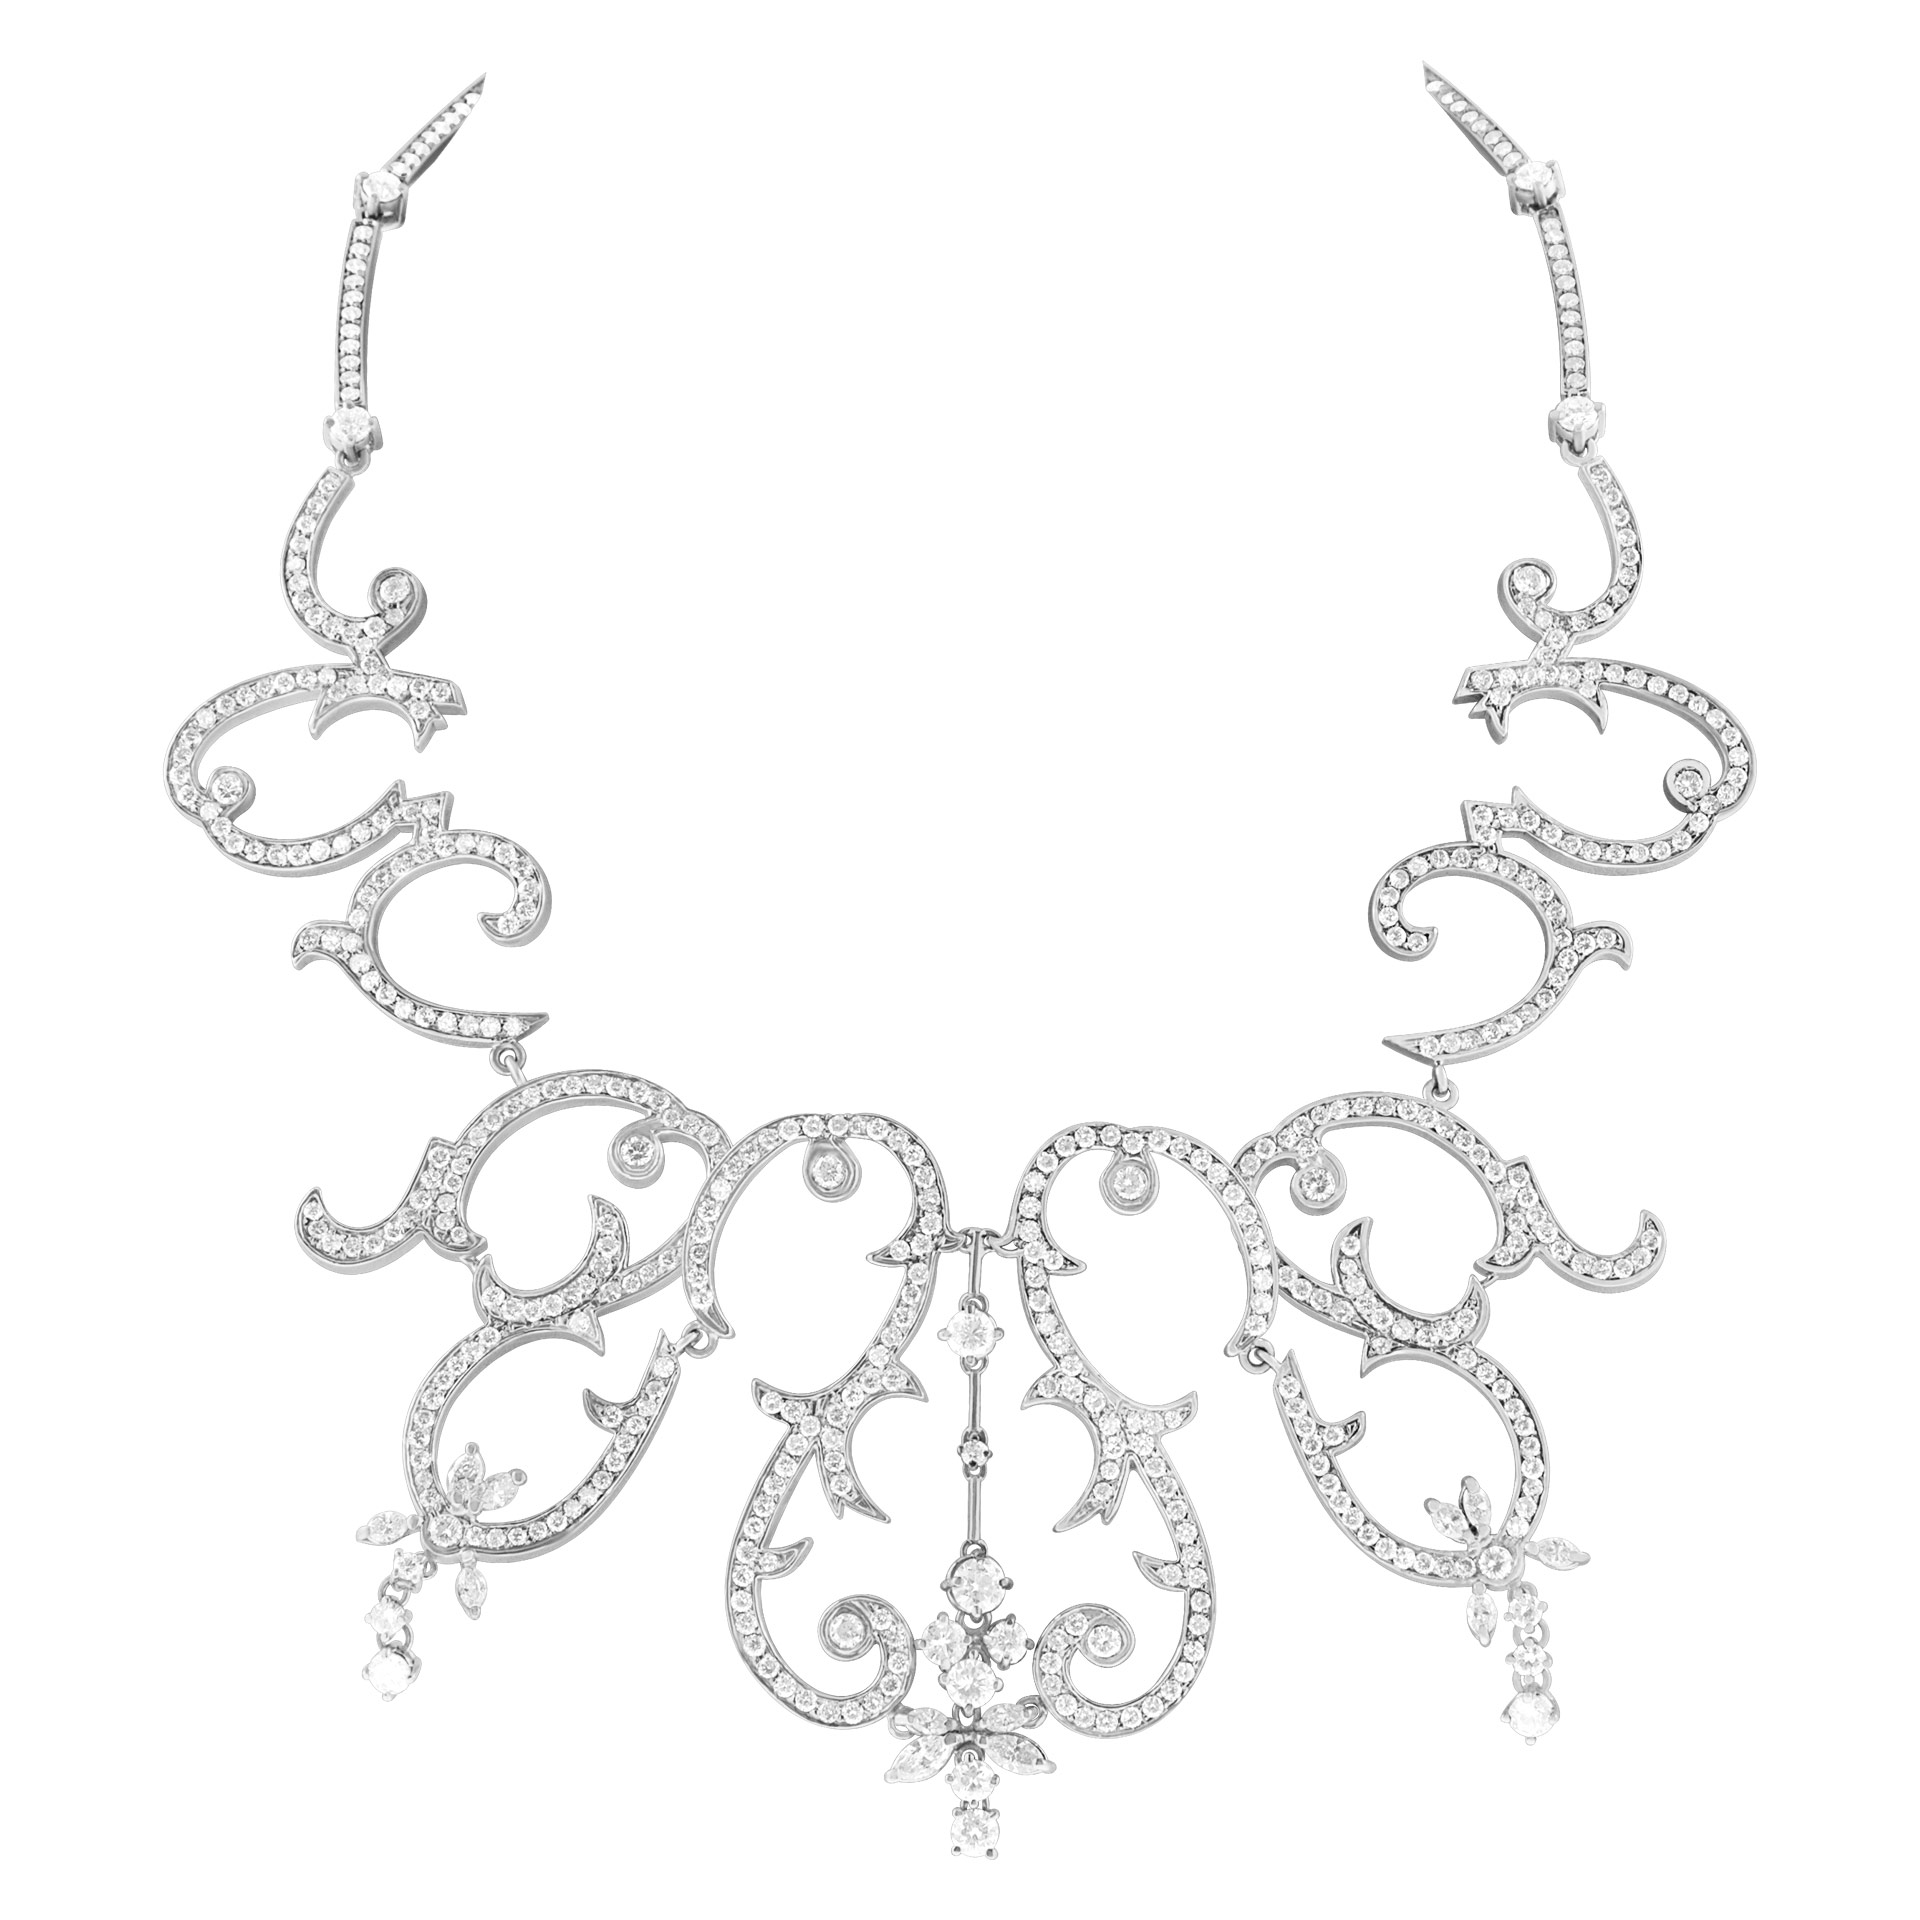 Retro-design "Elizabeth Taylor" style diamond necklace in 14k white gold. Approx 23.75 carats. image 1